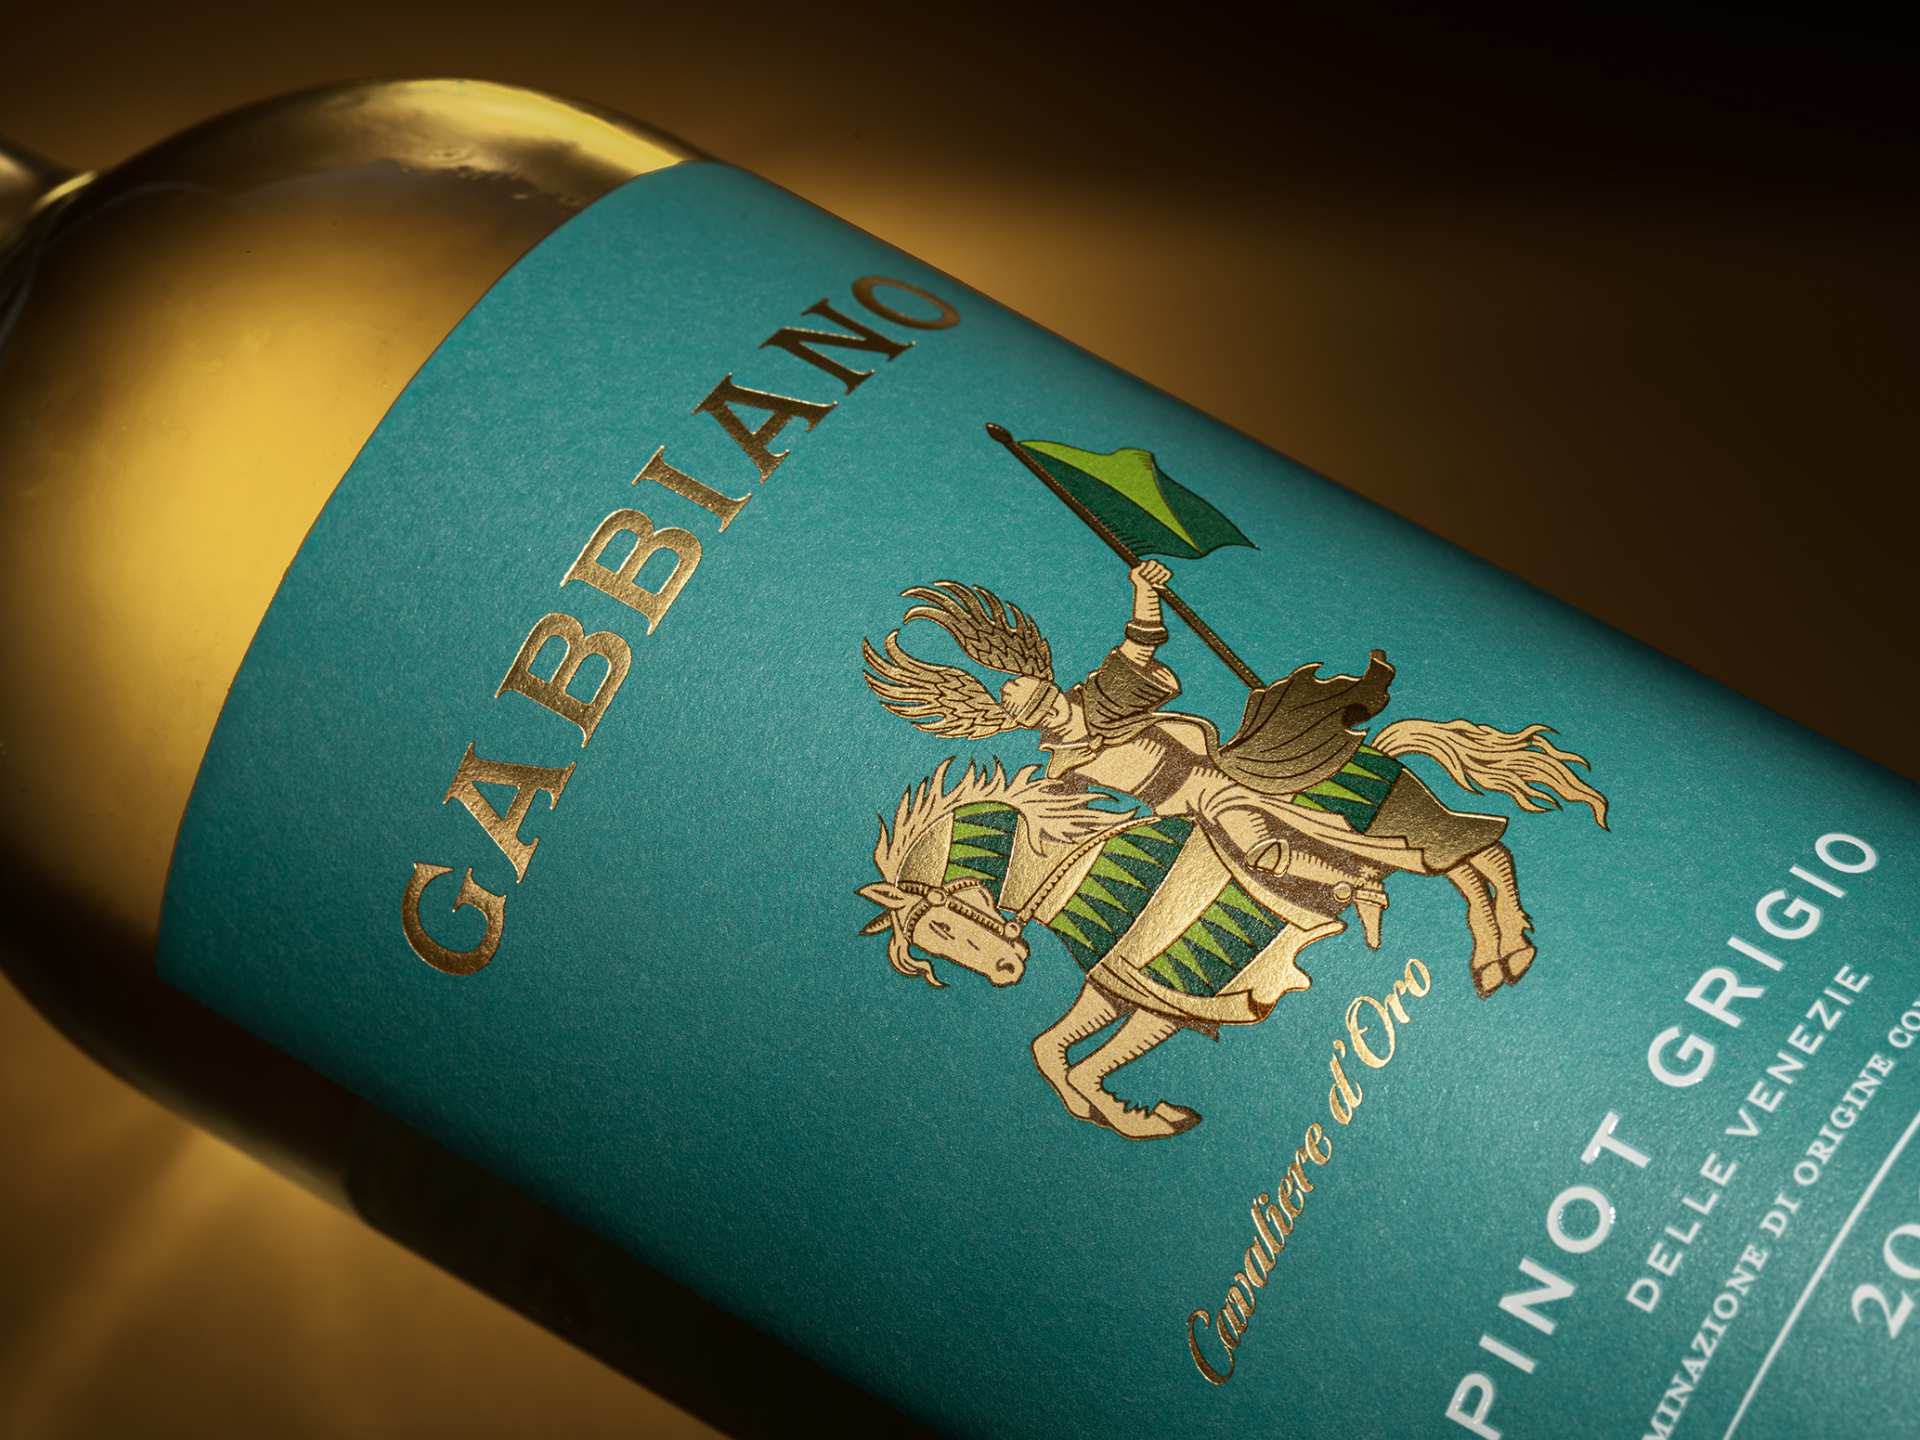 The green label close up of Gabbiano Pinot Grigio IGT